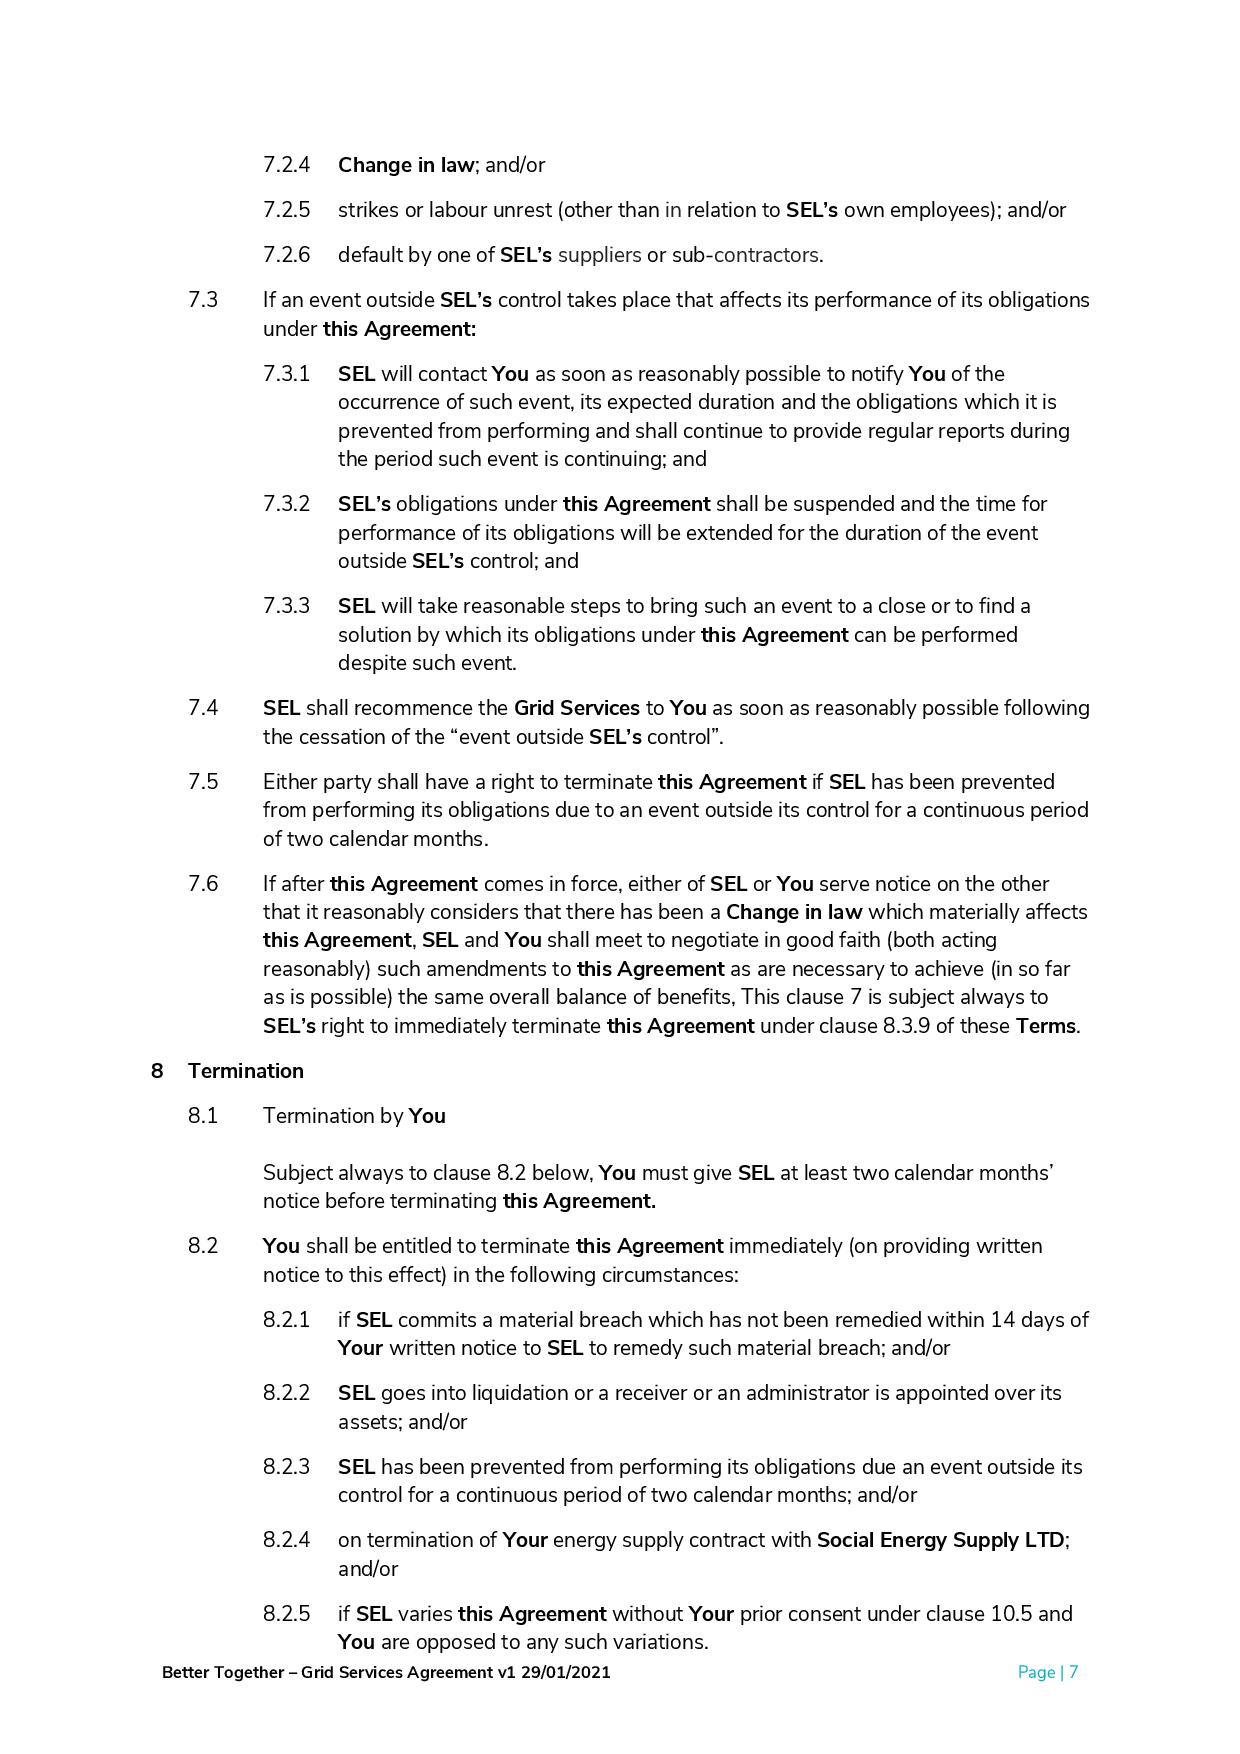 Better_Together_-_Grid_Services_Agreement-page-008.jpg